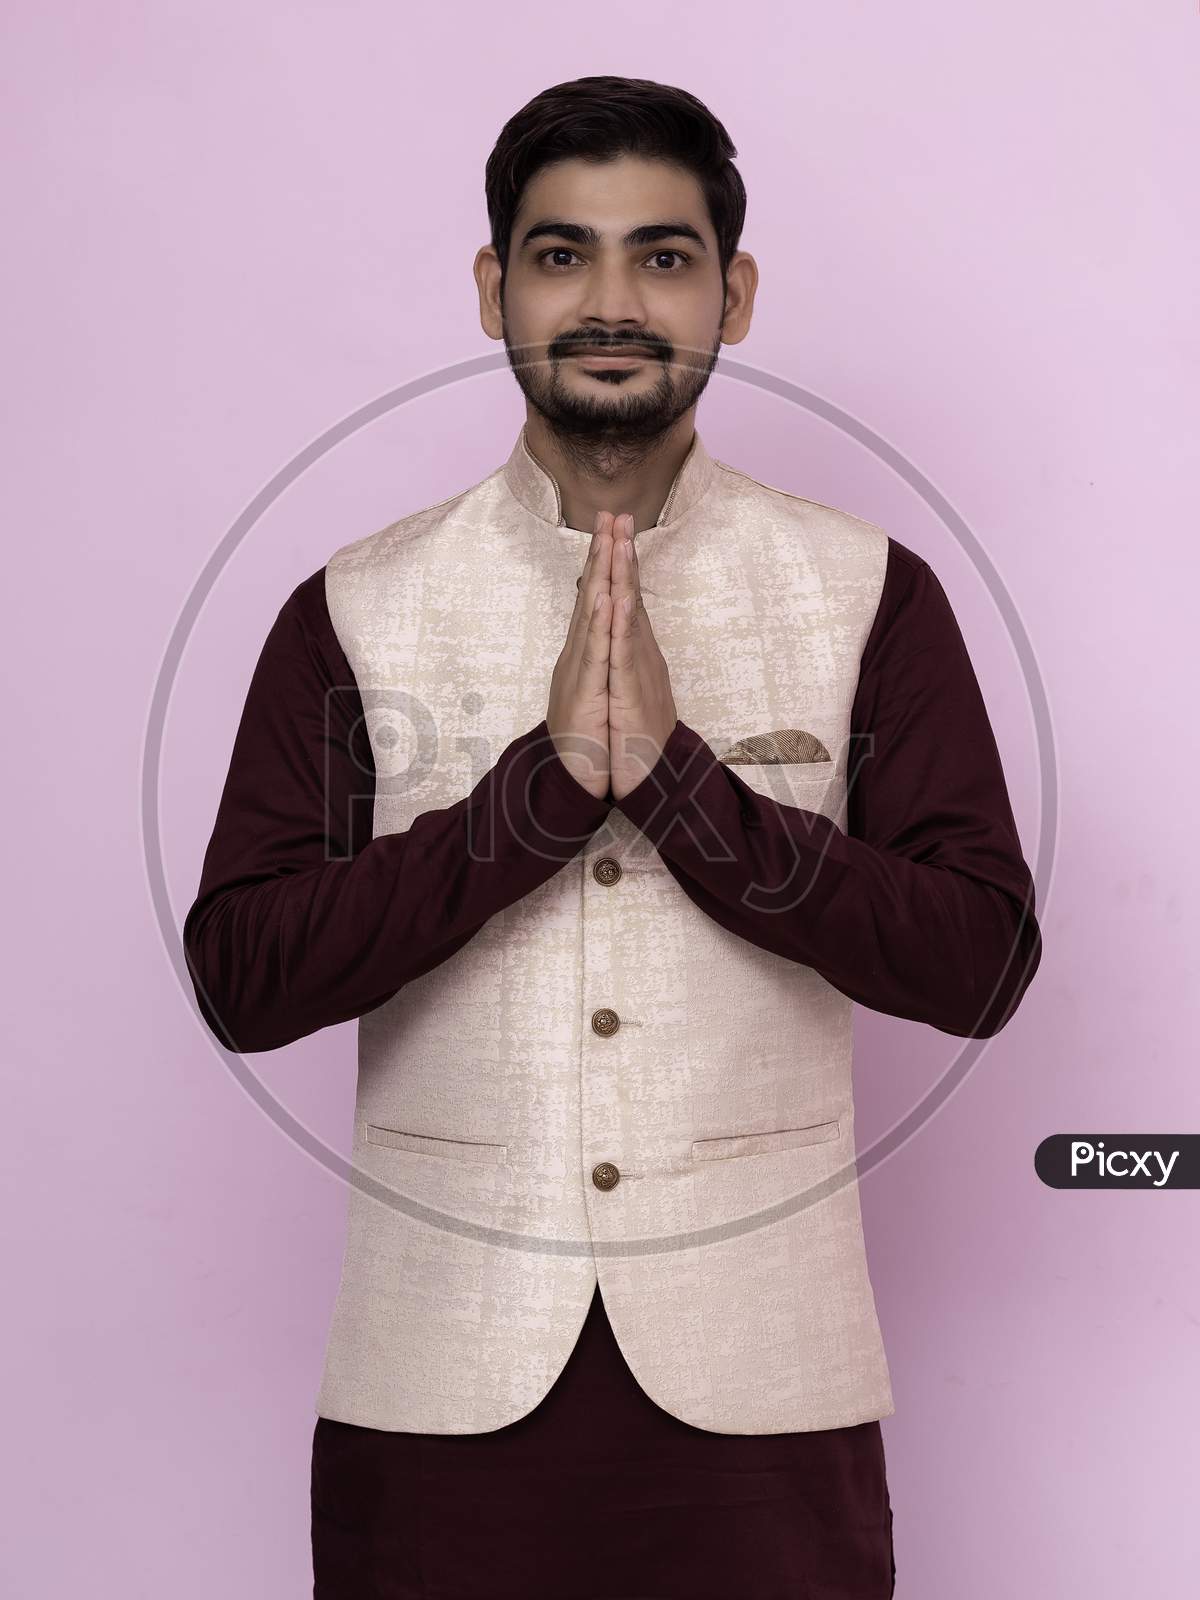 A Portrait Of A Indian Man In A Traditional Wear In Welcome Gesture Pose - Namaste.